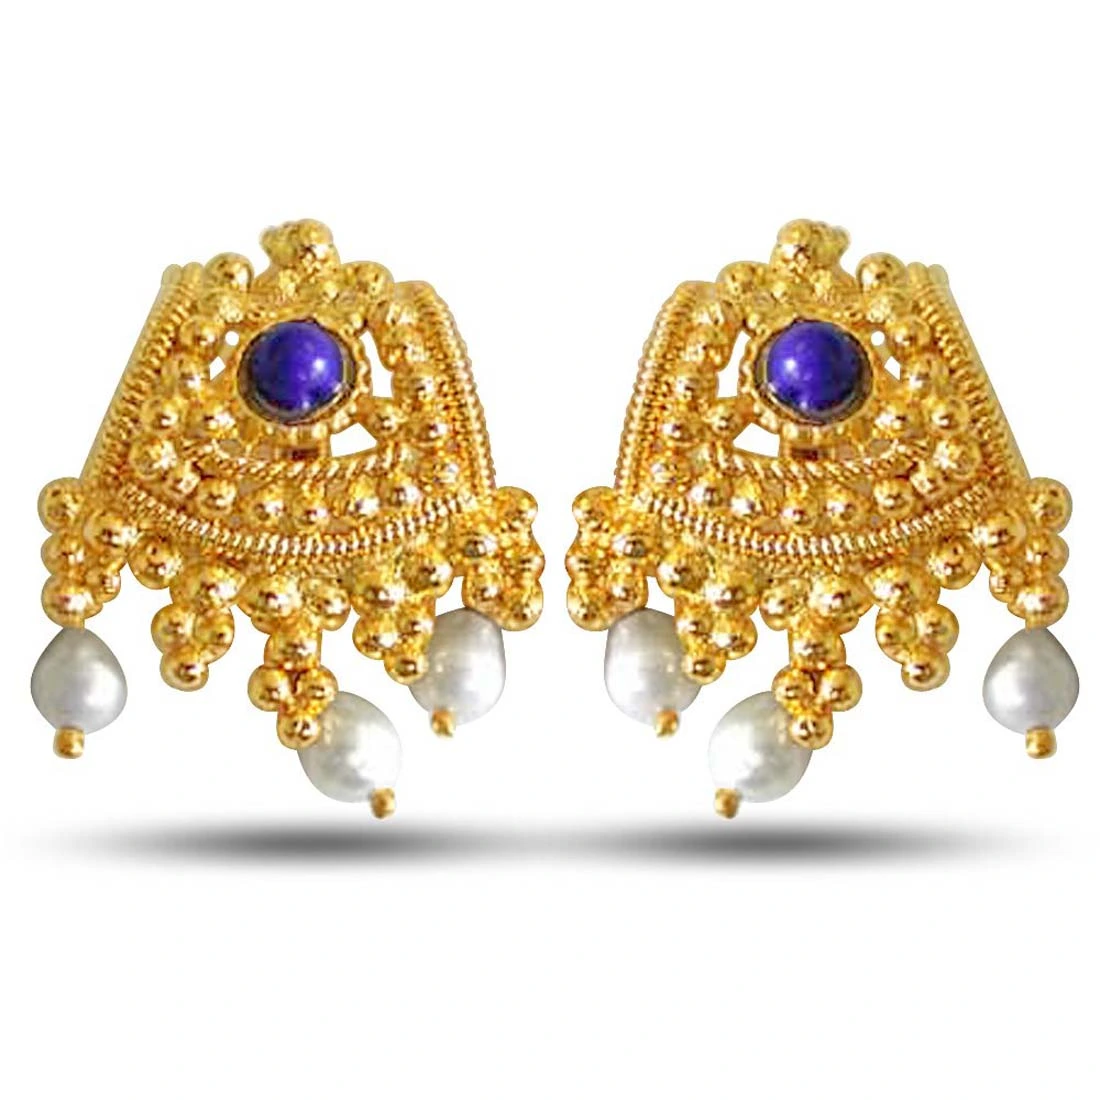 Classic Ethnic - Temple Design Freshwater Pearl, Blue Lapiz & Gold Plated Earrings for Women (SE51A)